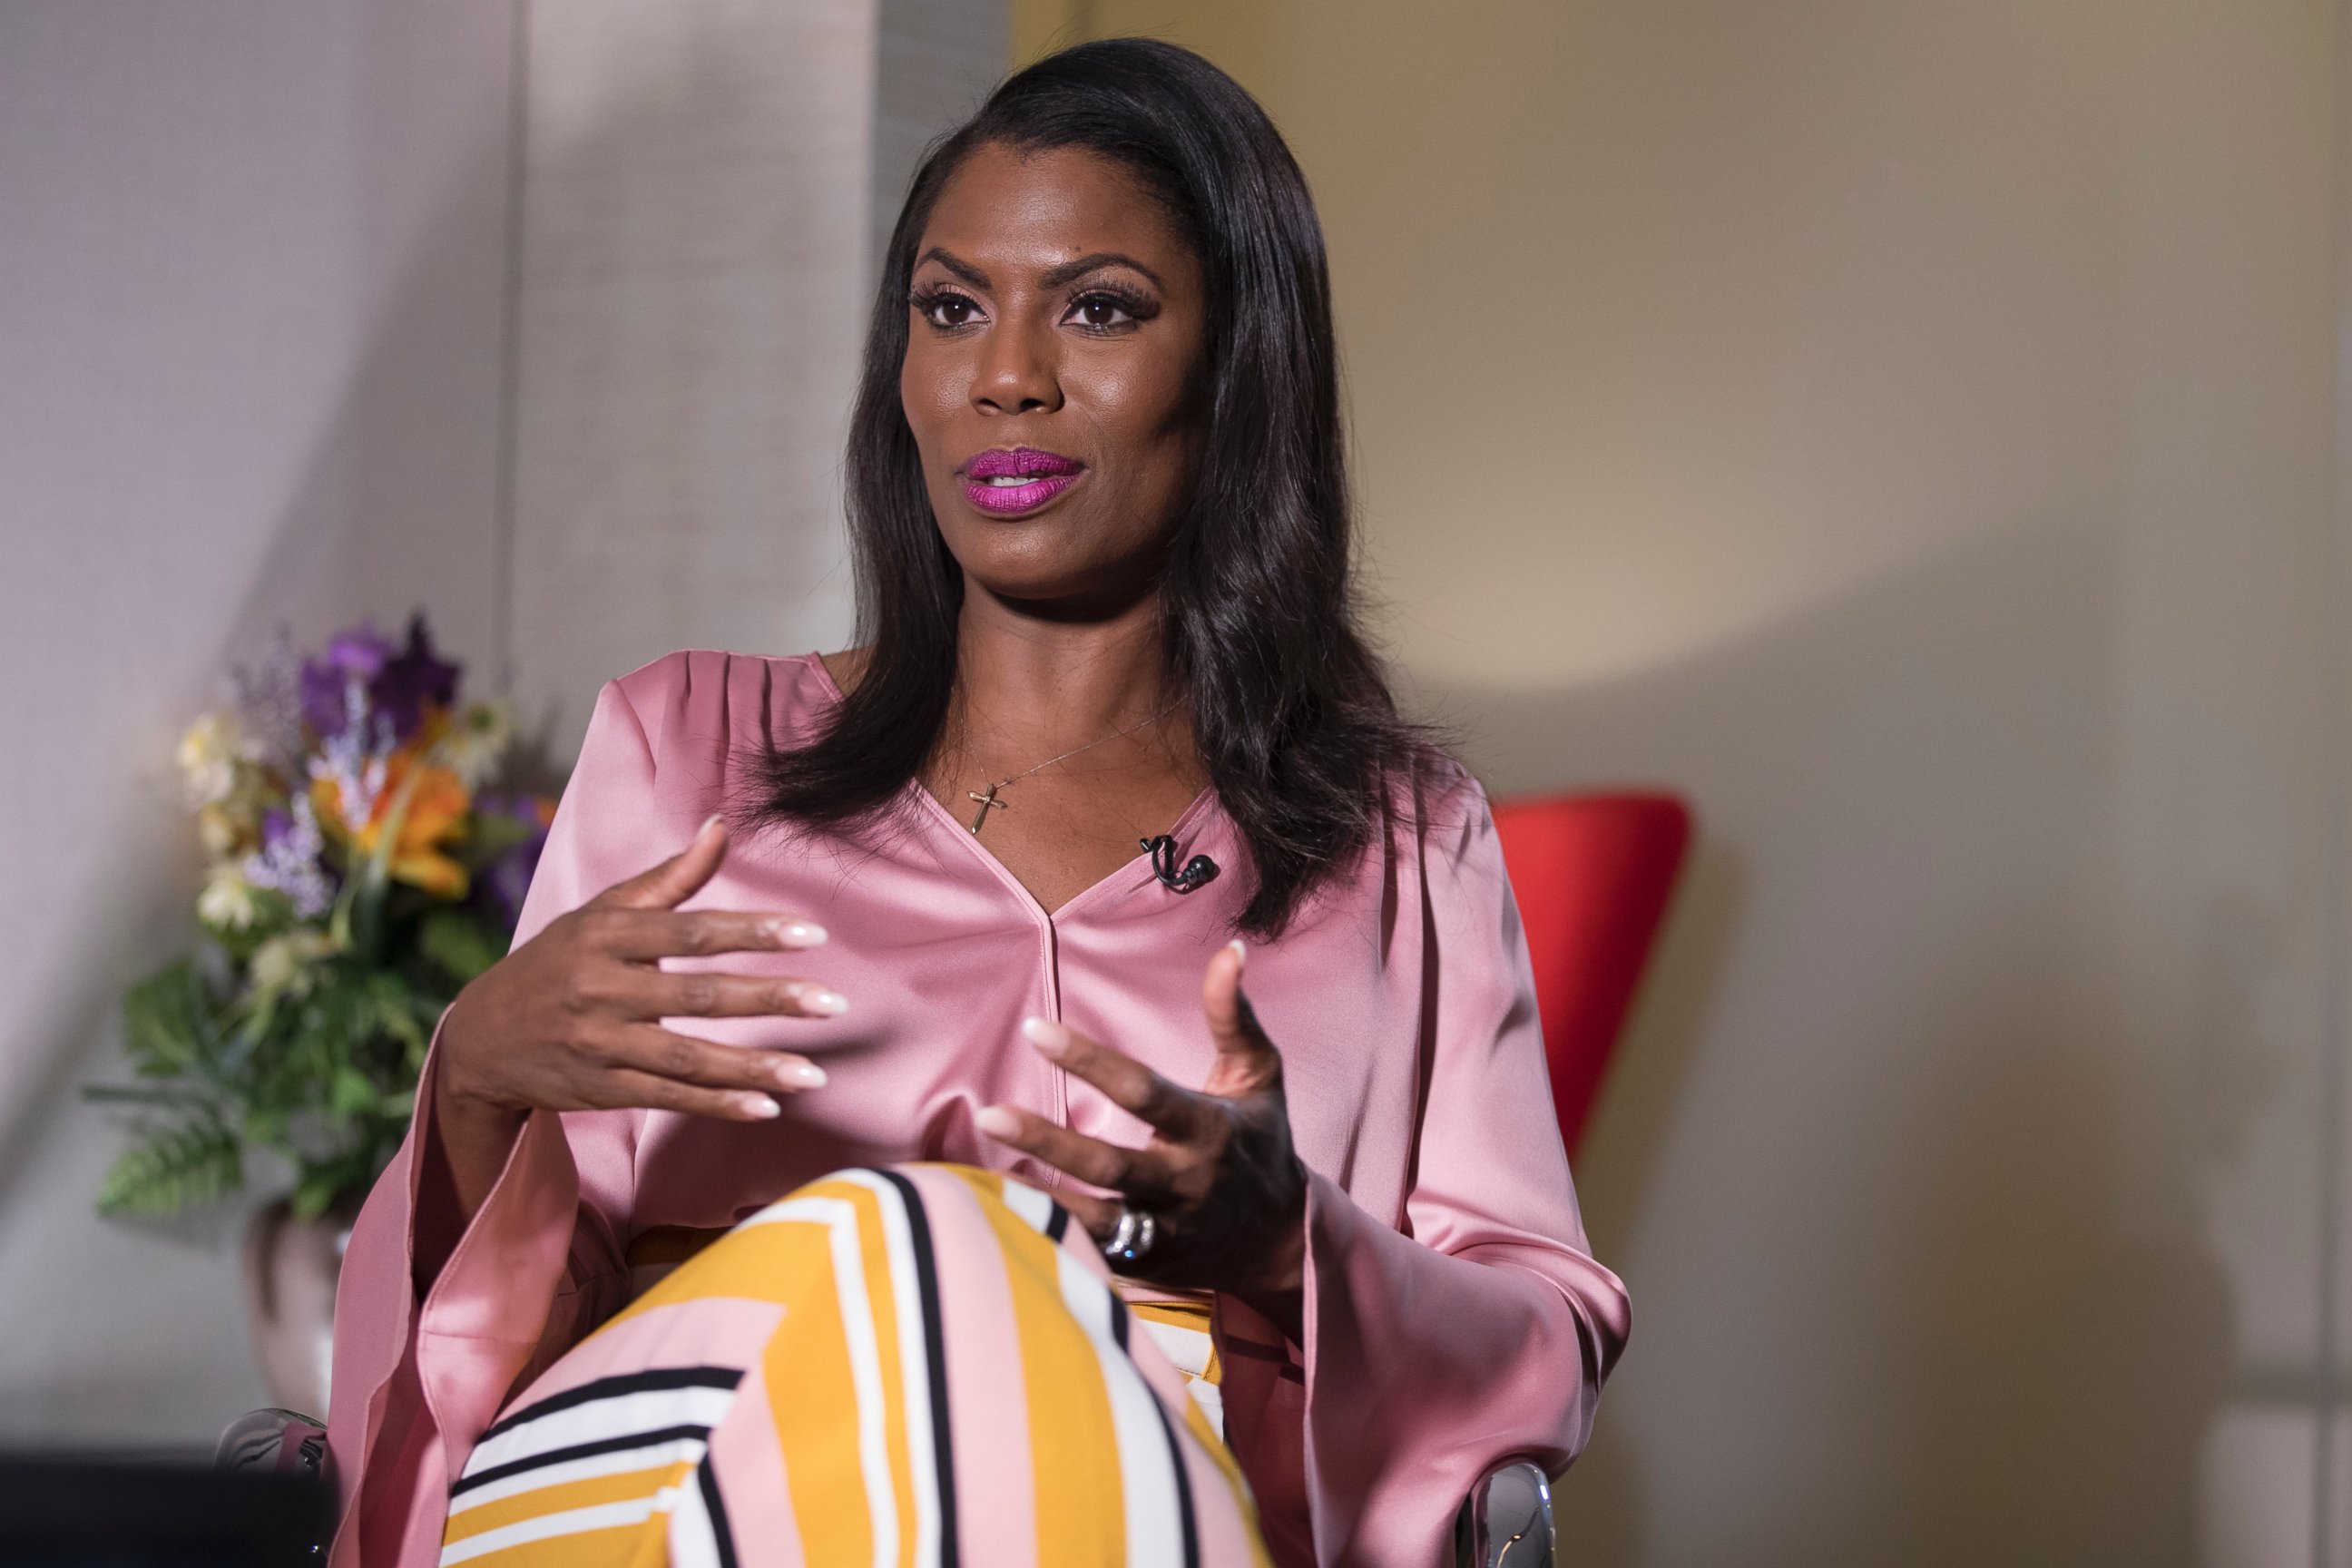 Former White House staffer Omarosa Manigault Newman speaks during an interview with The Associated Press, Tuesday, Aug. 14, 2018, in New York.